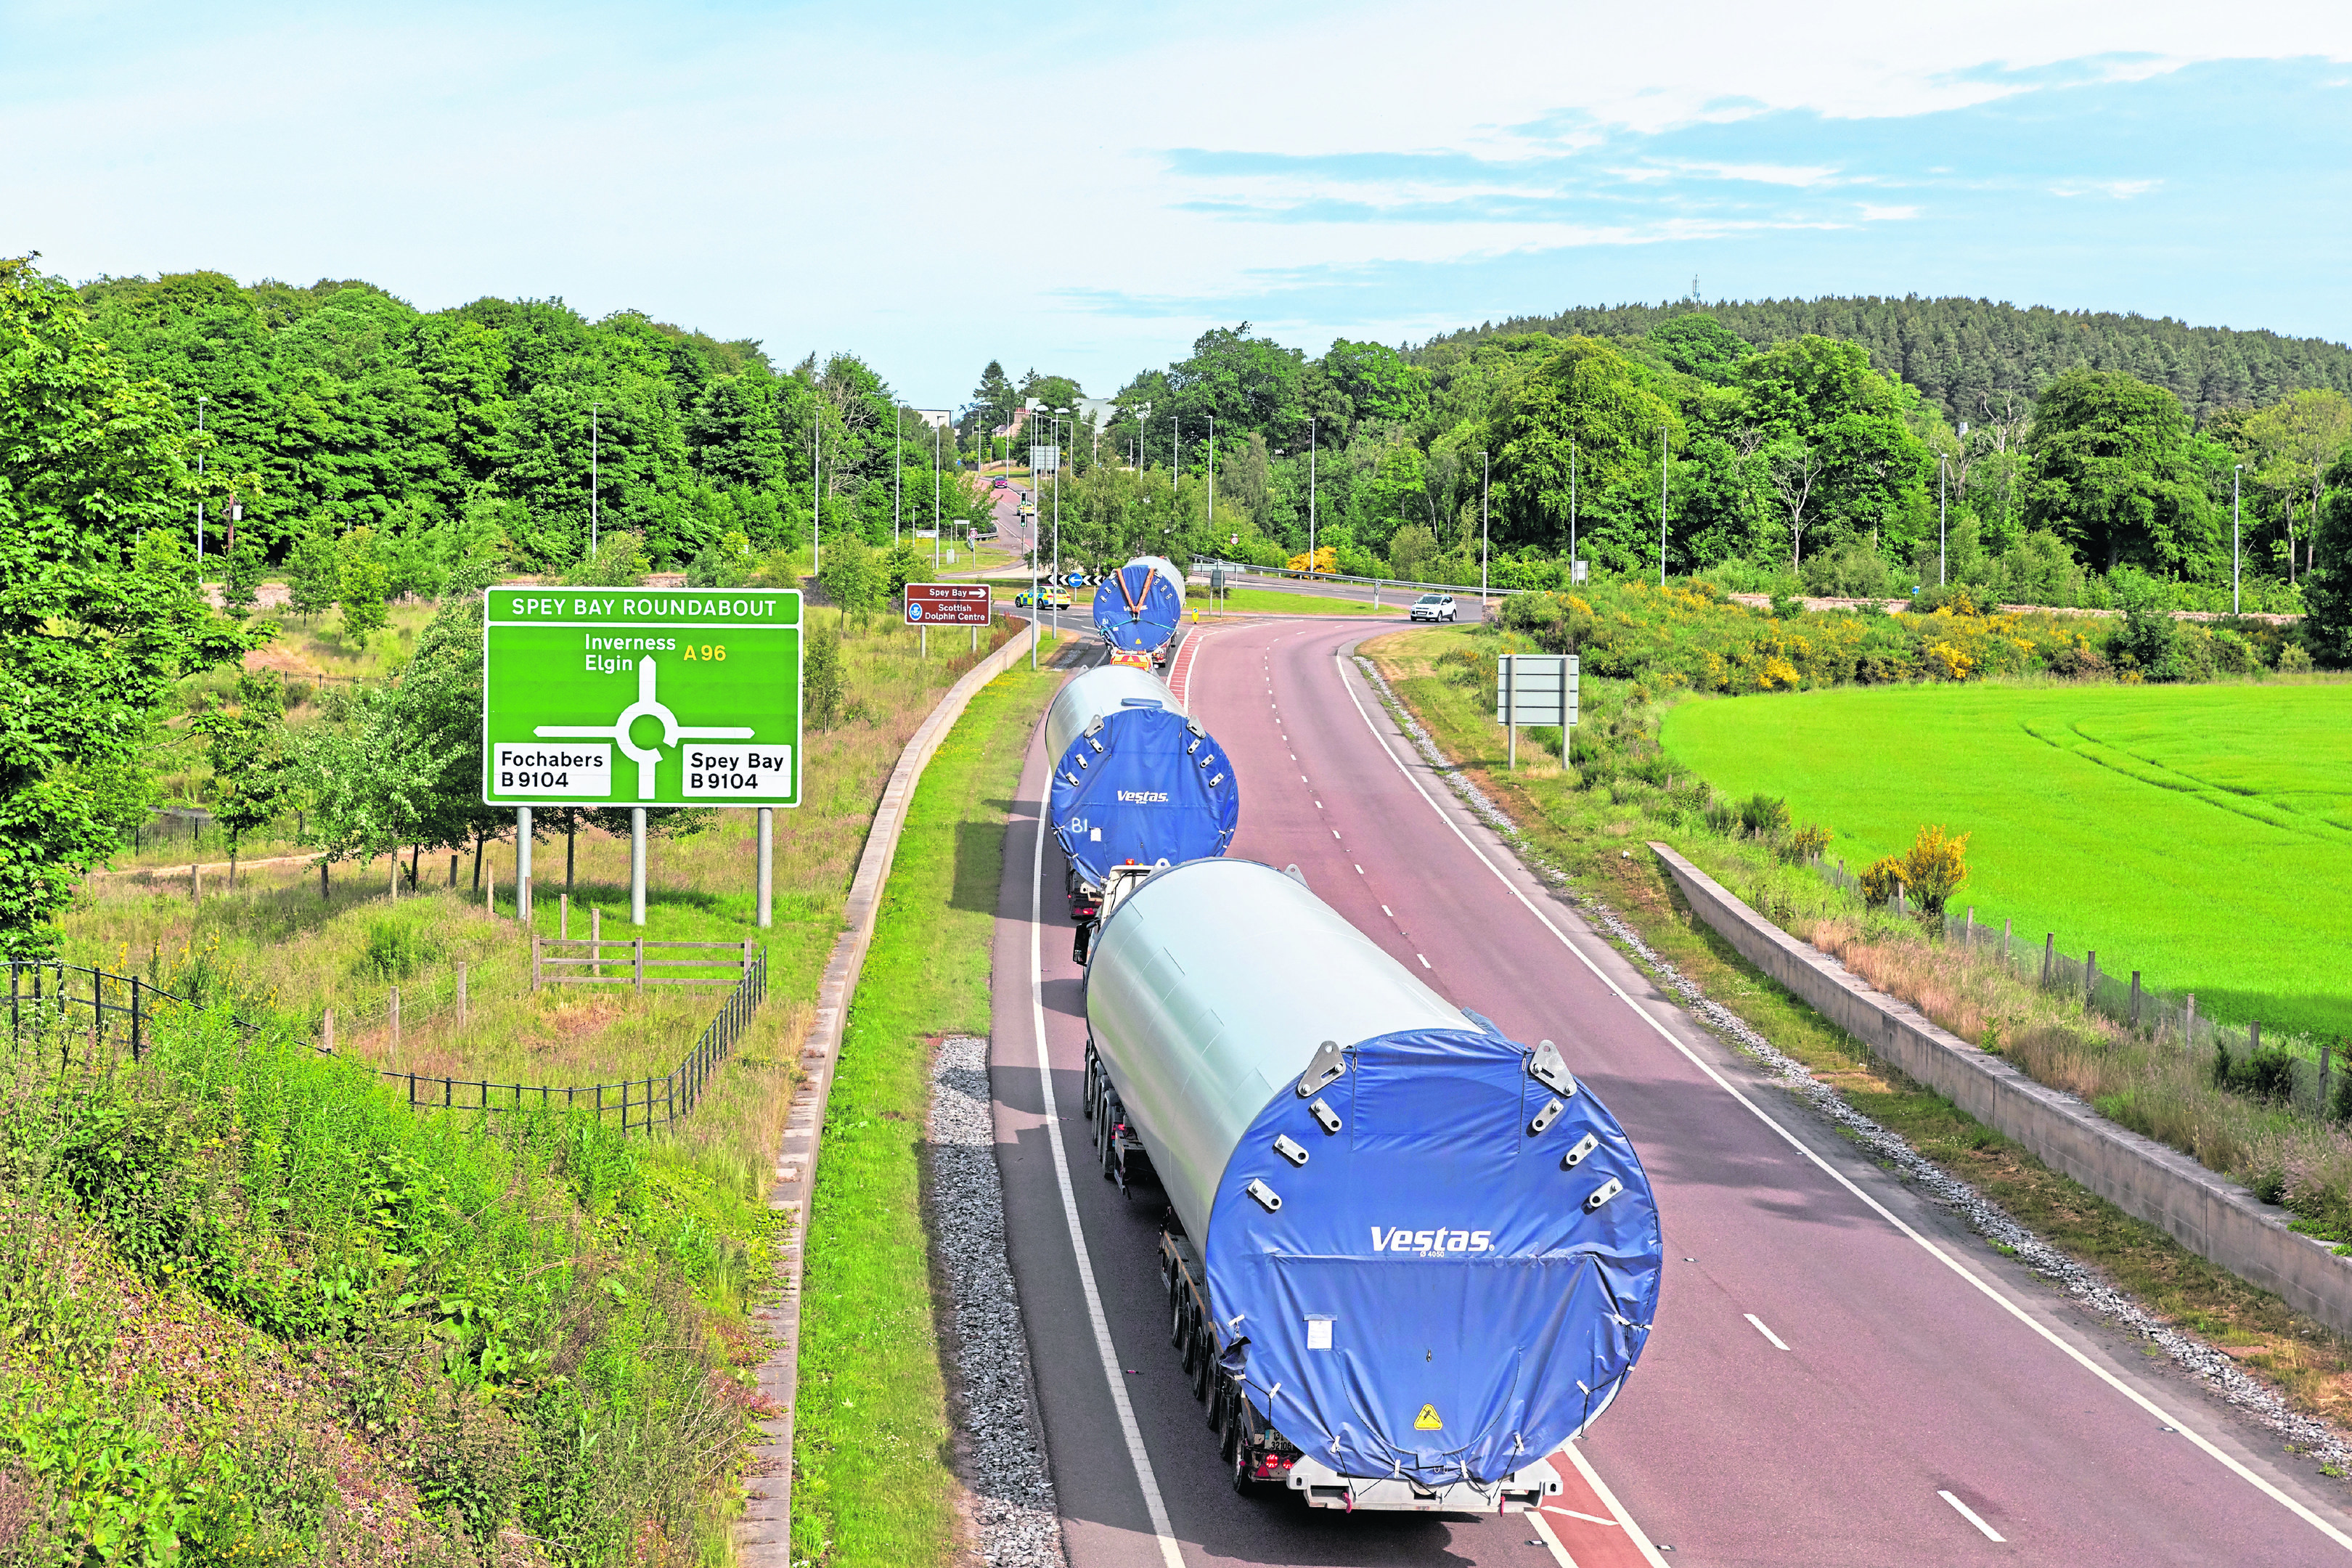 return journey: Three turbine base units slow traffic down as they make their way along the A96 at Fochabers Bypass